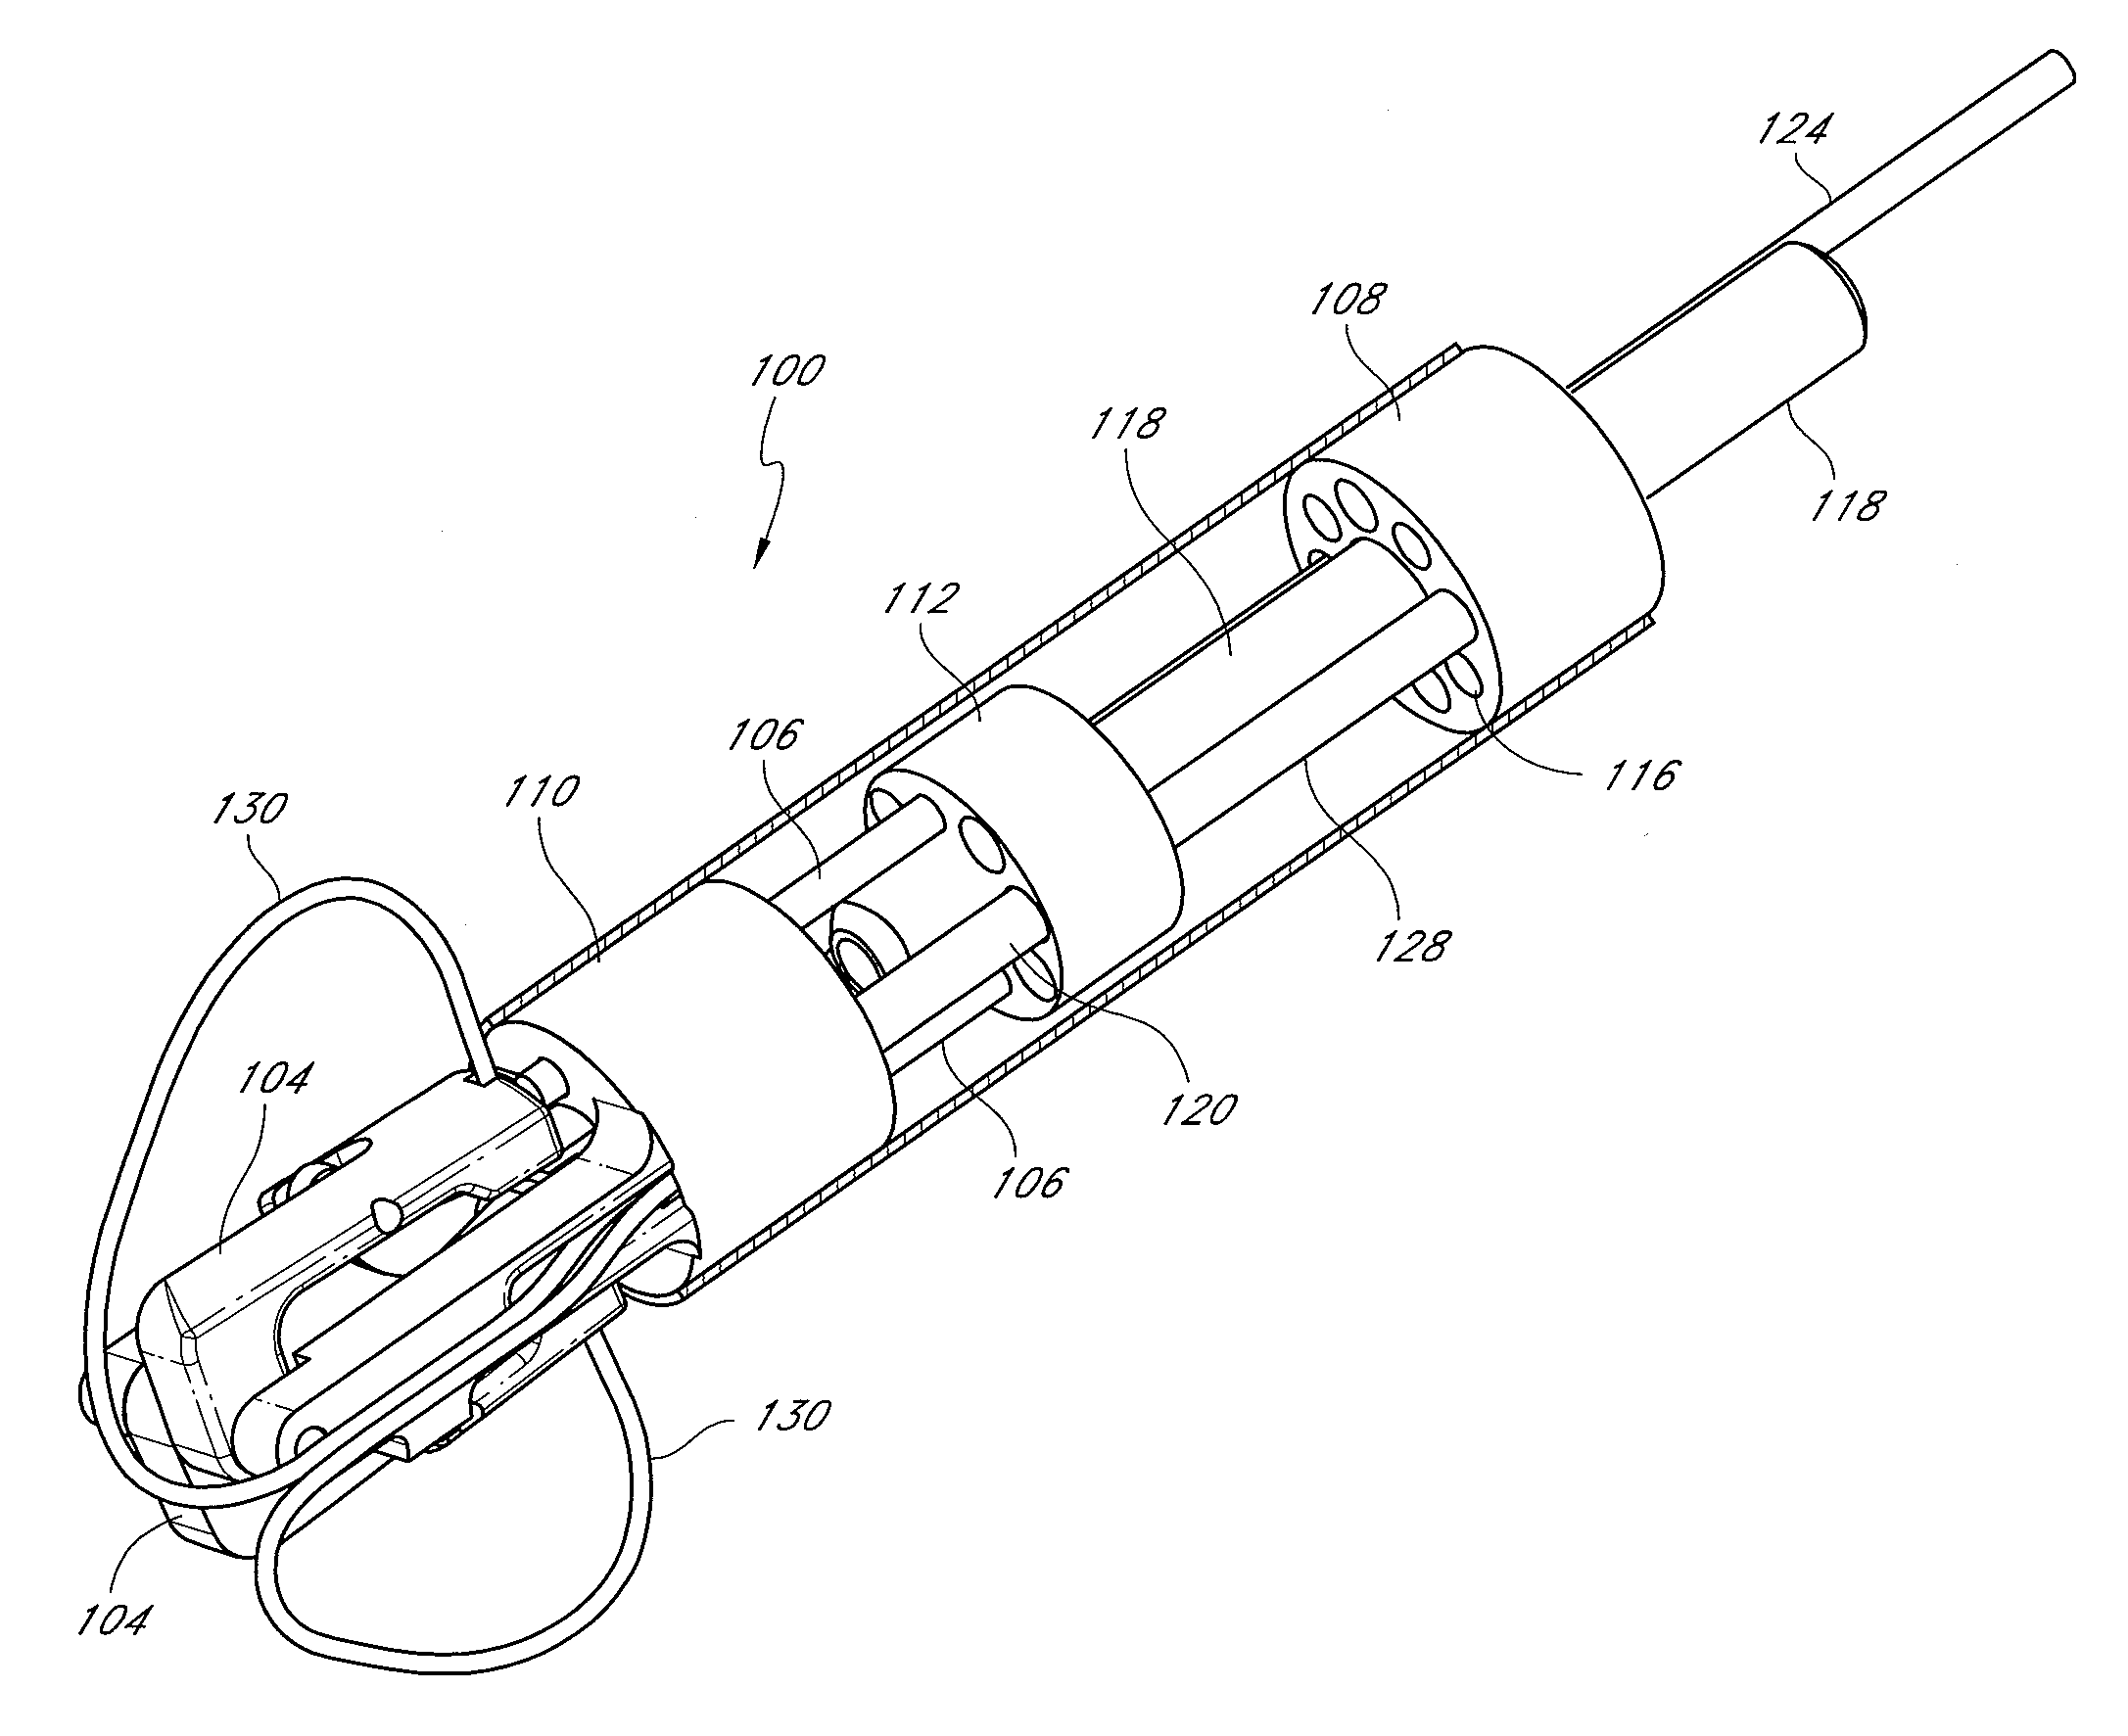 Suturing devices and methods for suturing an anatomic valve